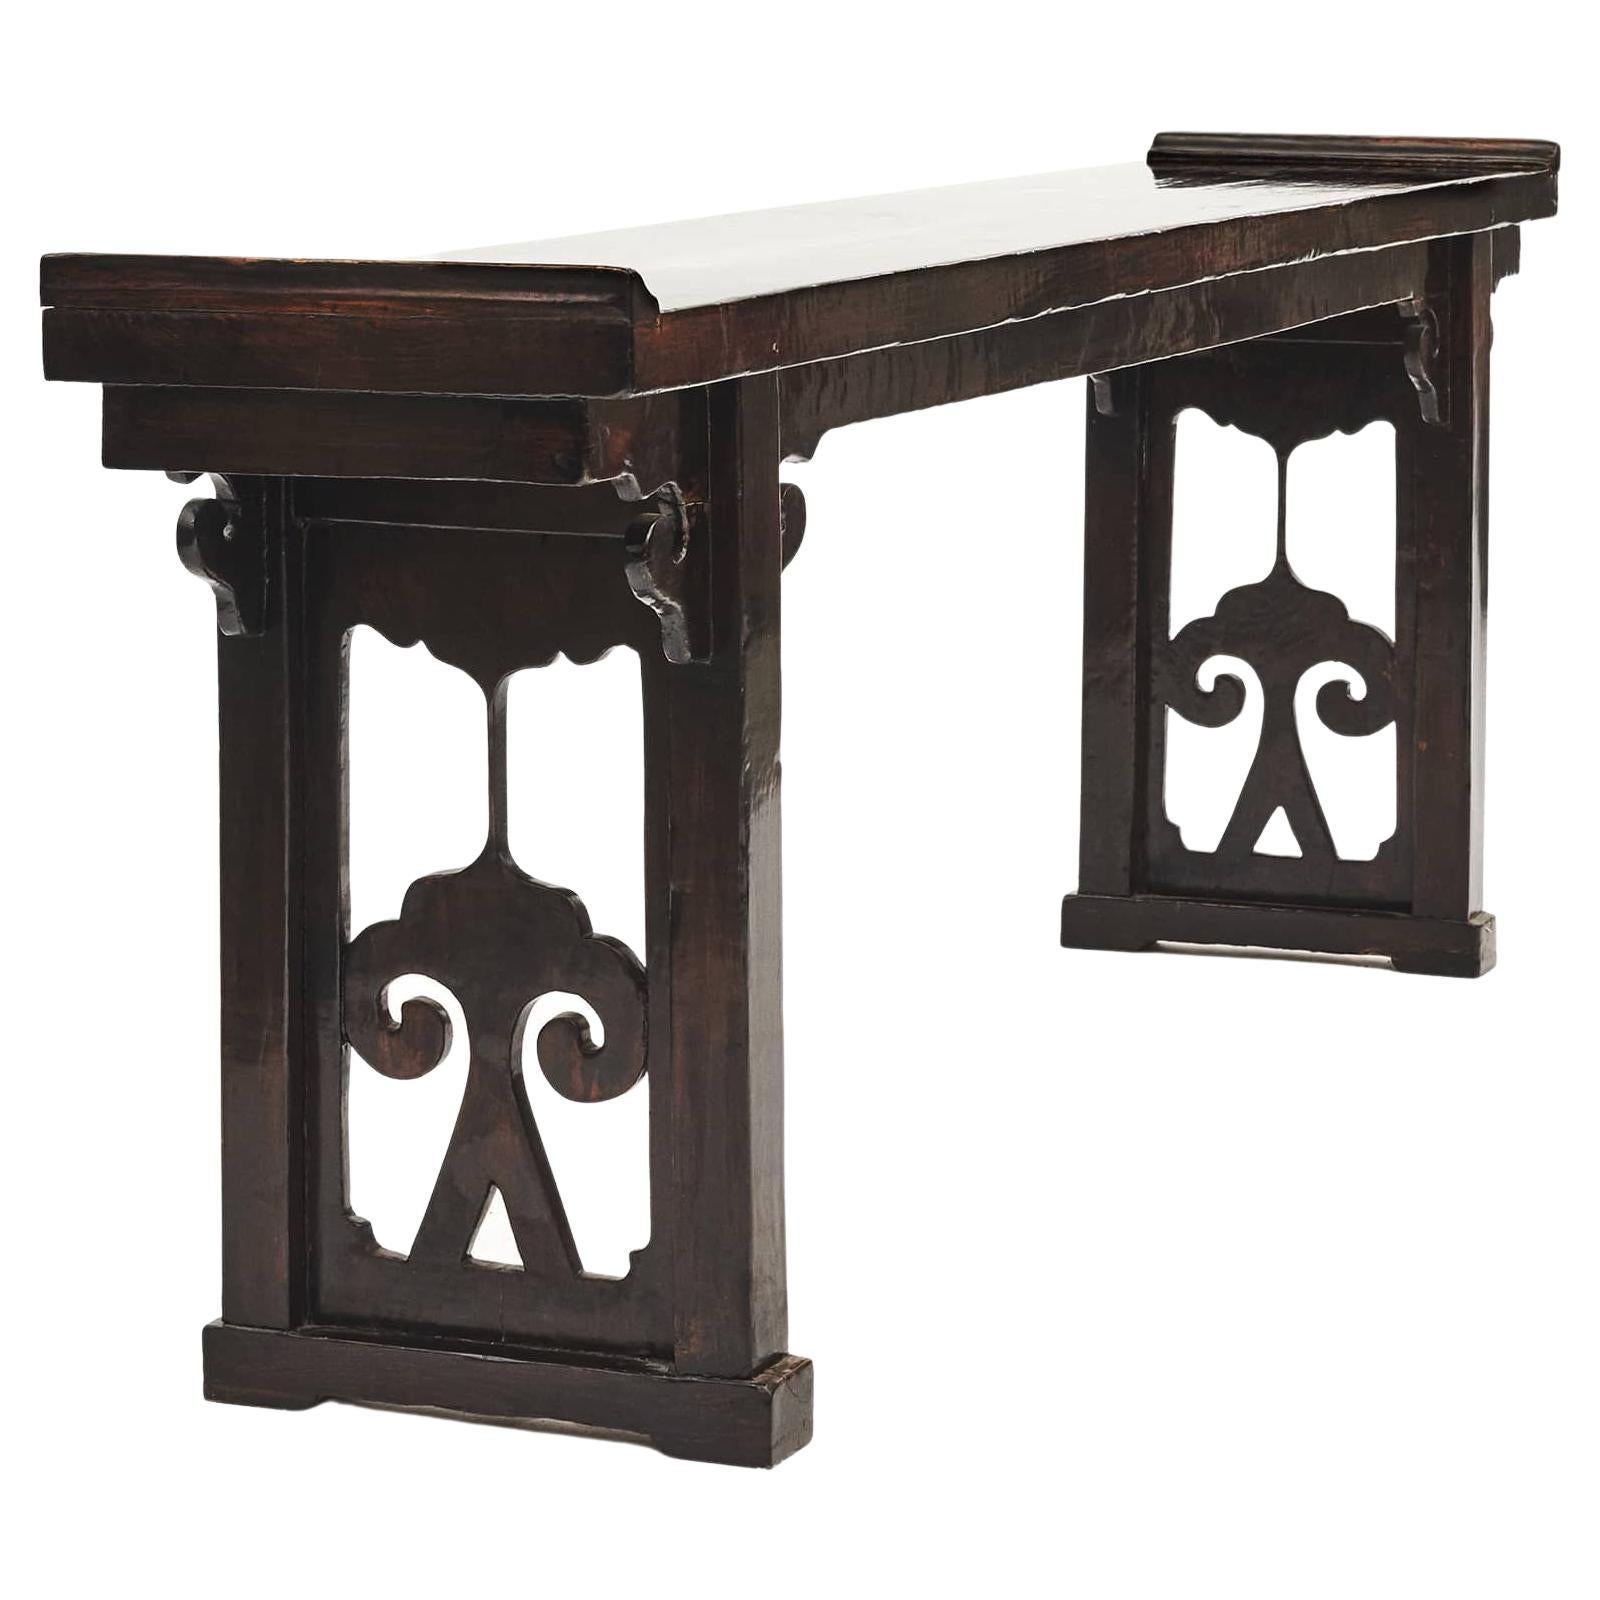 Chinese 19th Century Alter Console Table from Jiangsu